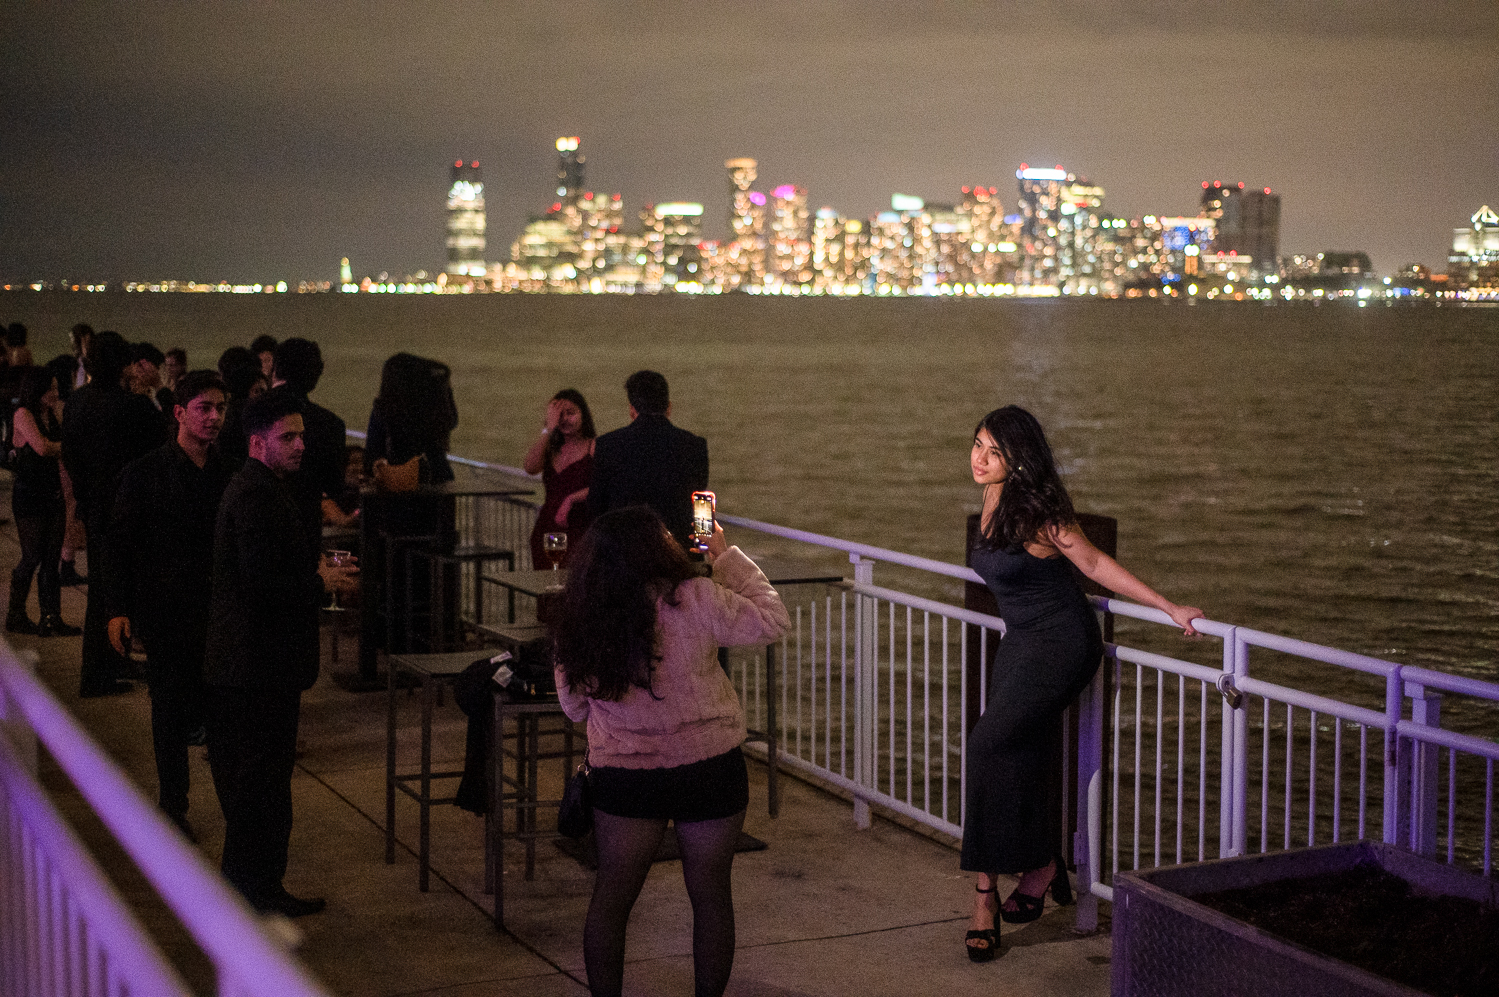 A person takes a photo of a woman in a fancy dress who is holding onto a railing behind her. Behind the subject of the photo is a large body of water, and the New York City skyline. It is nighttime, and several other people are standing in the shadows next to the pair taking the photo.